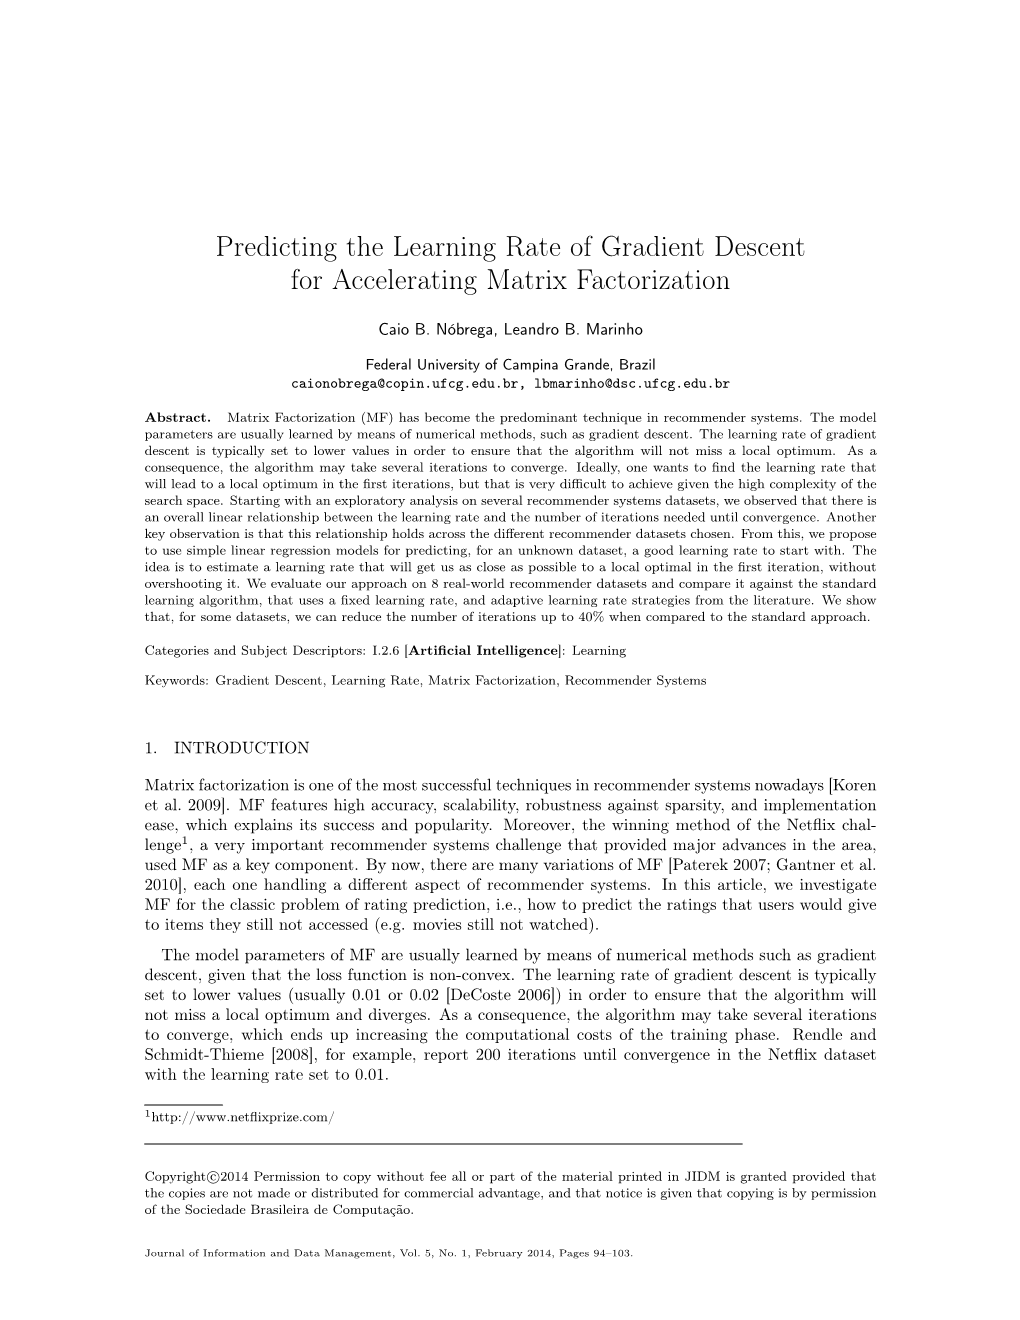 Predicting the Learning Rate of Gradient Descent for Accelerating Matrix Factorization